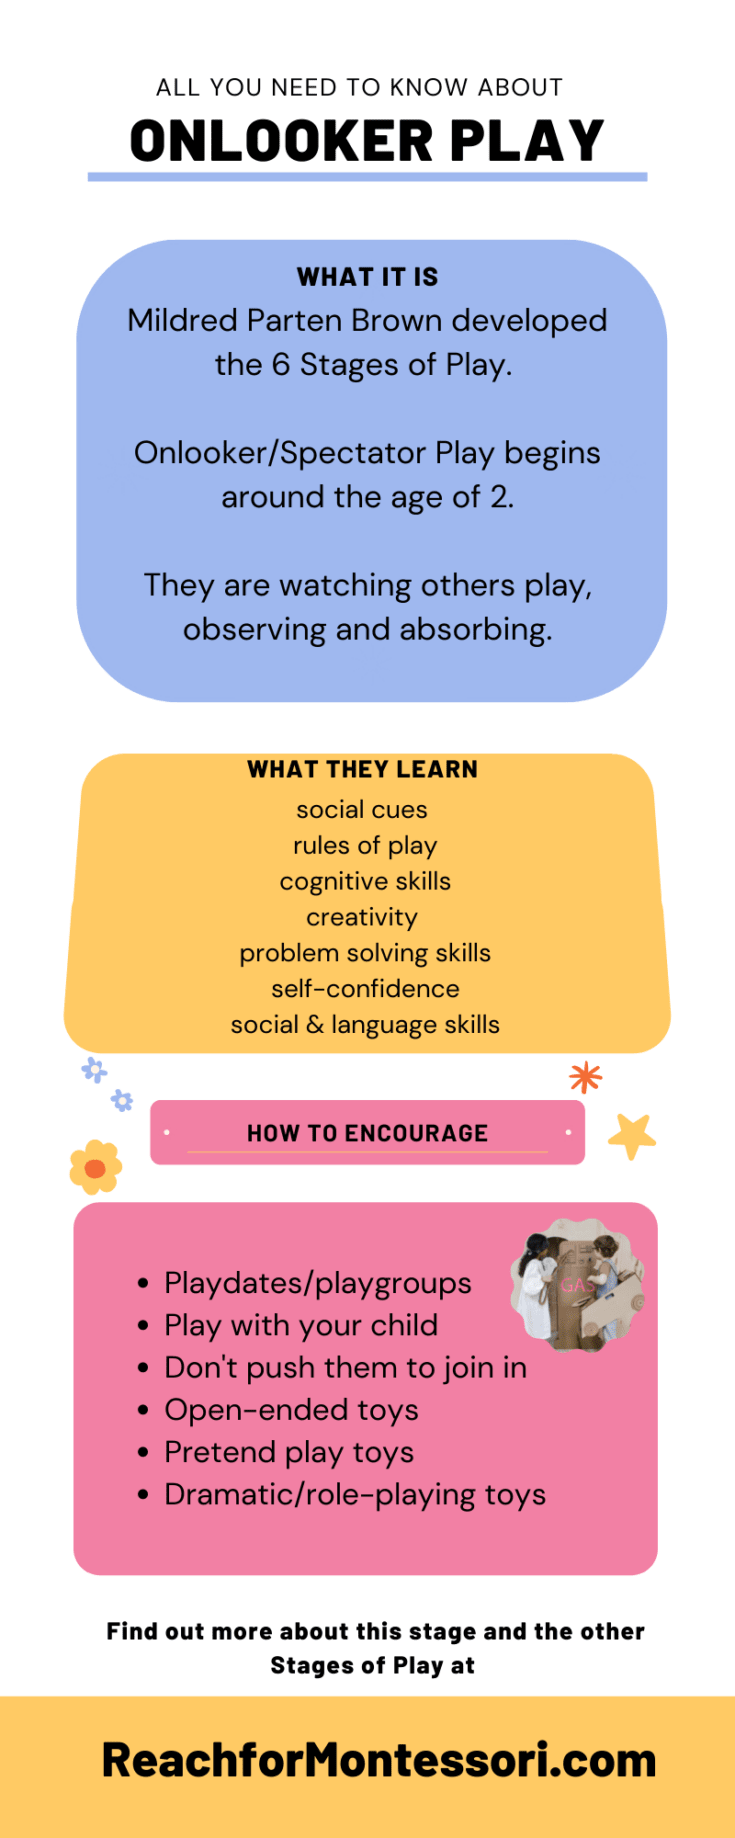 all you need to know about onlooker play infographic.